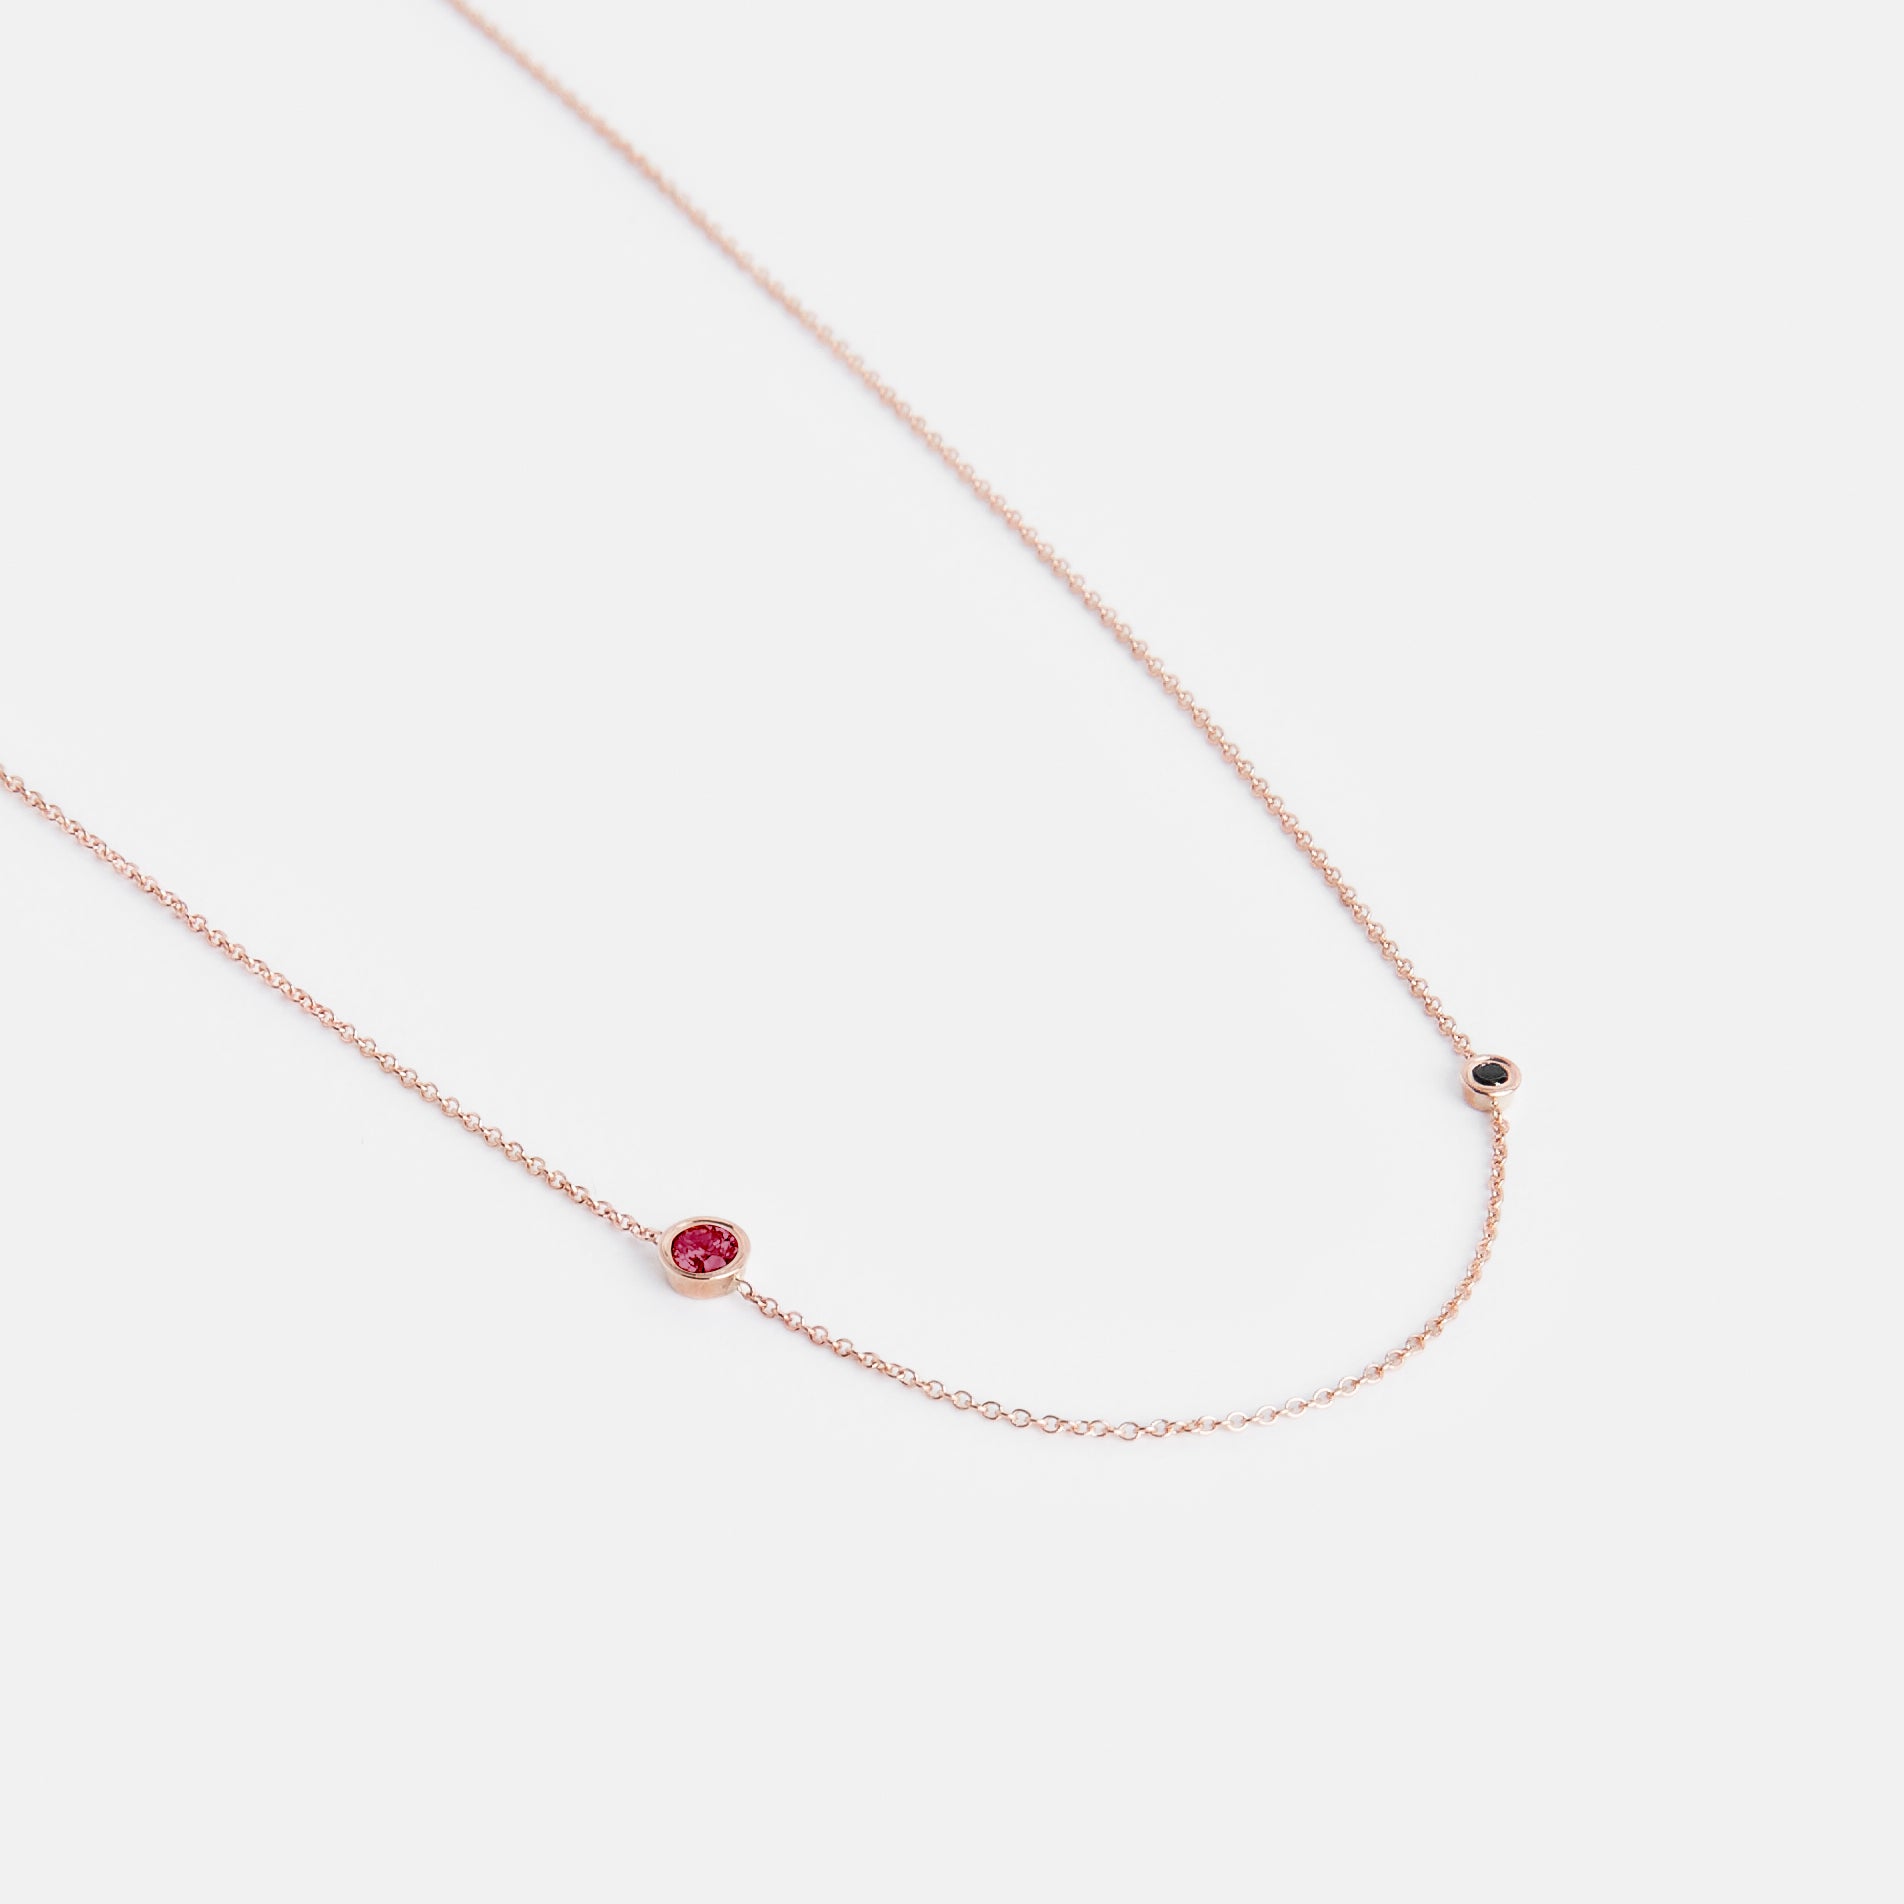 Iba Designer Necklace in 14k Rose Gold set with Rubies By SHW Fine Jewelry NYC